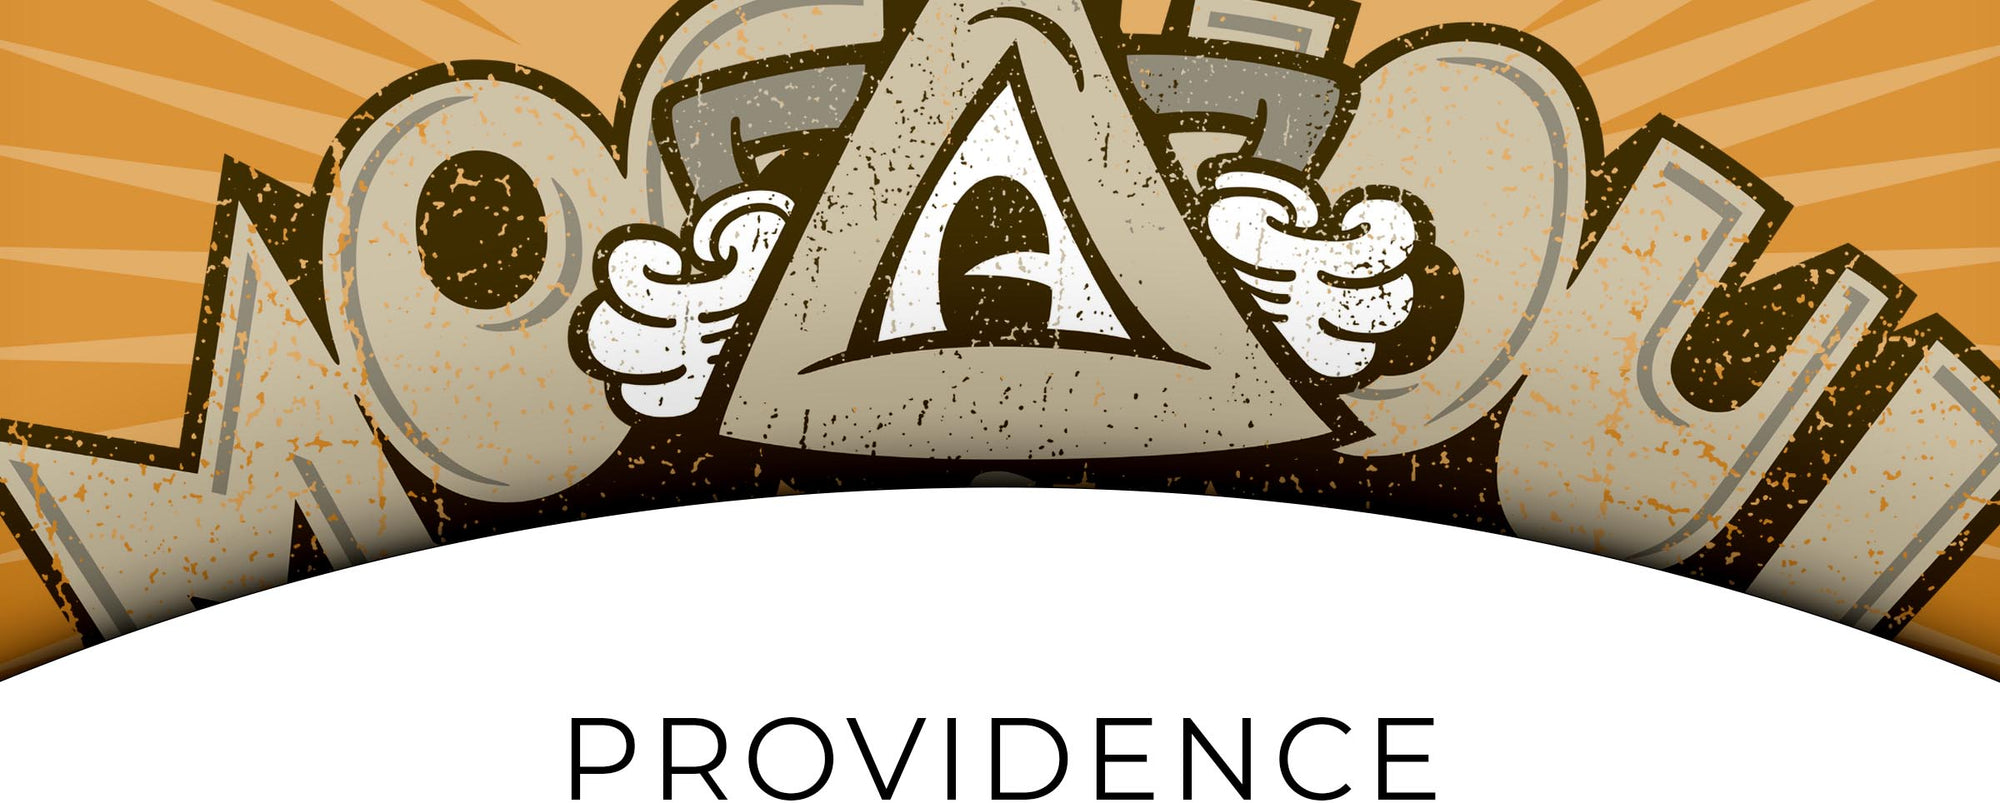 A 1920s style cartoon based on the Eye of Providence.